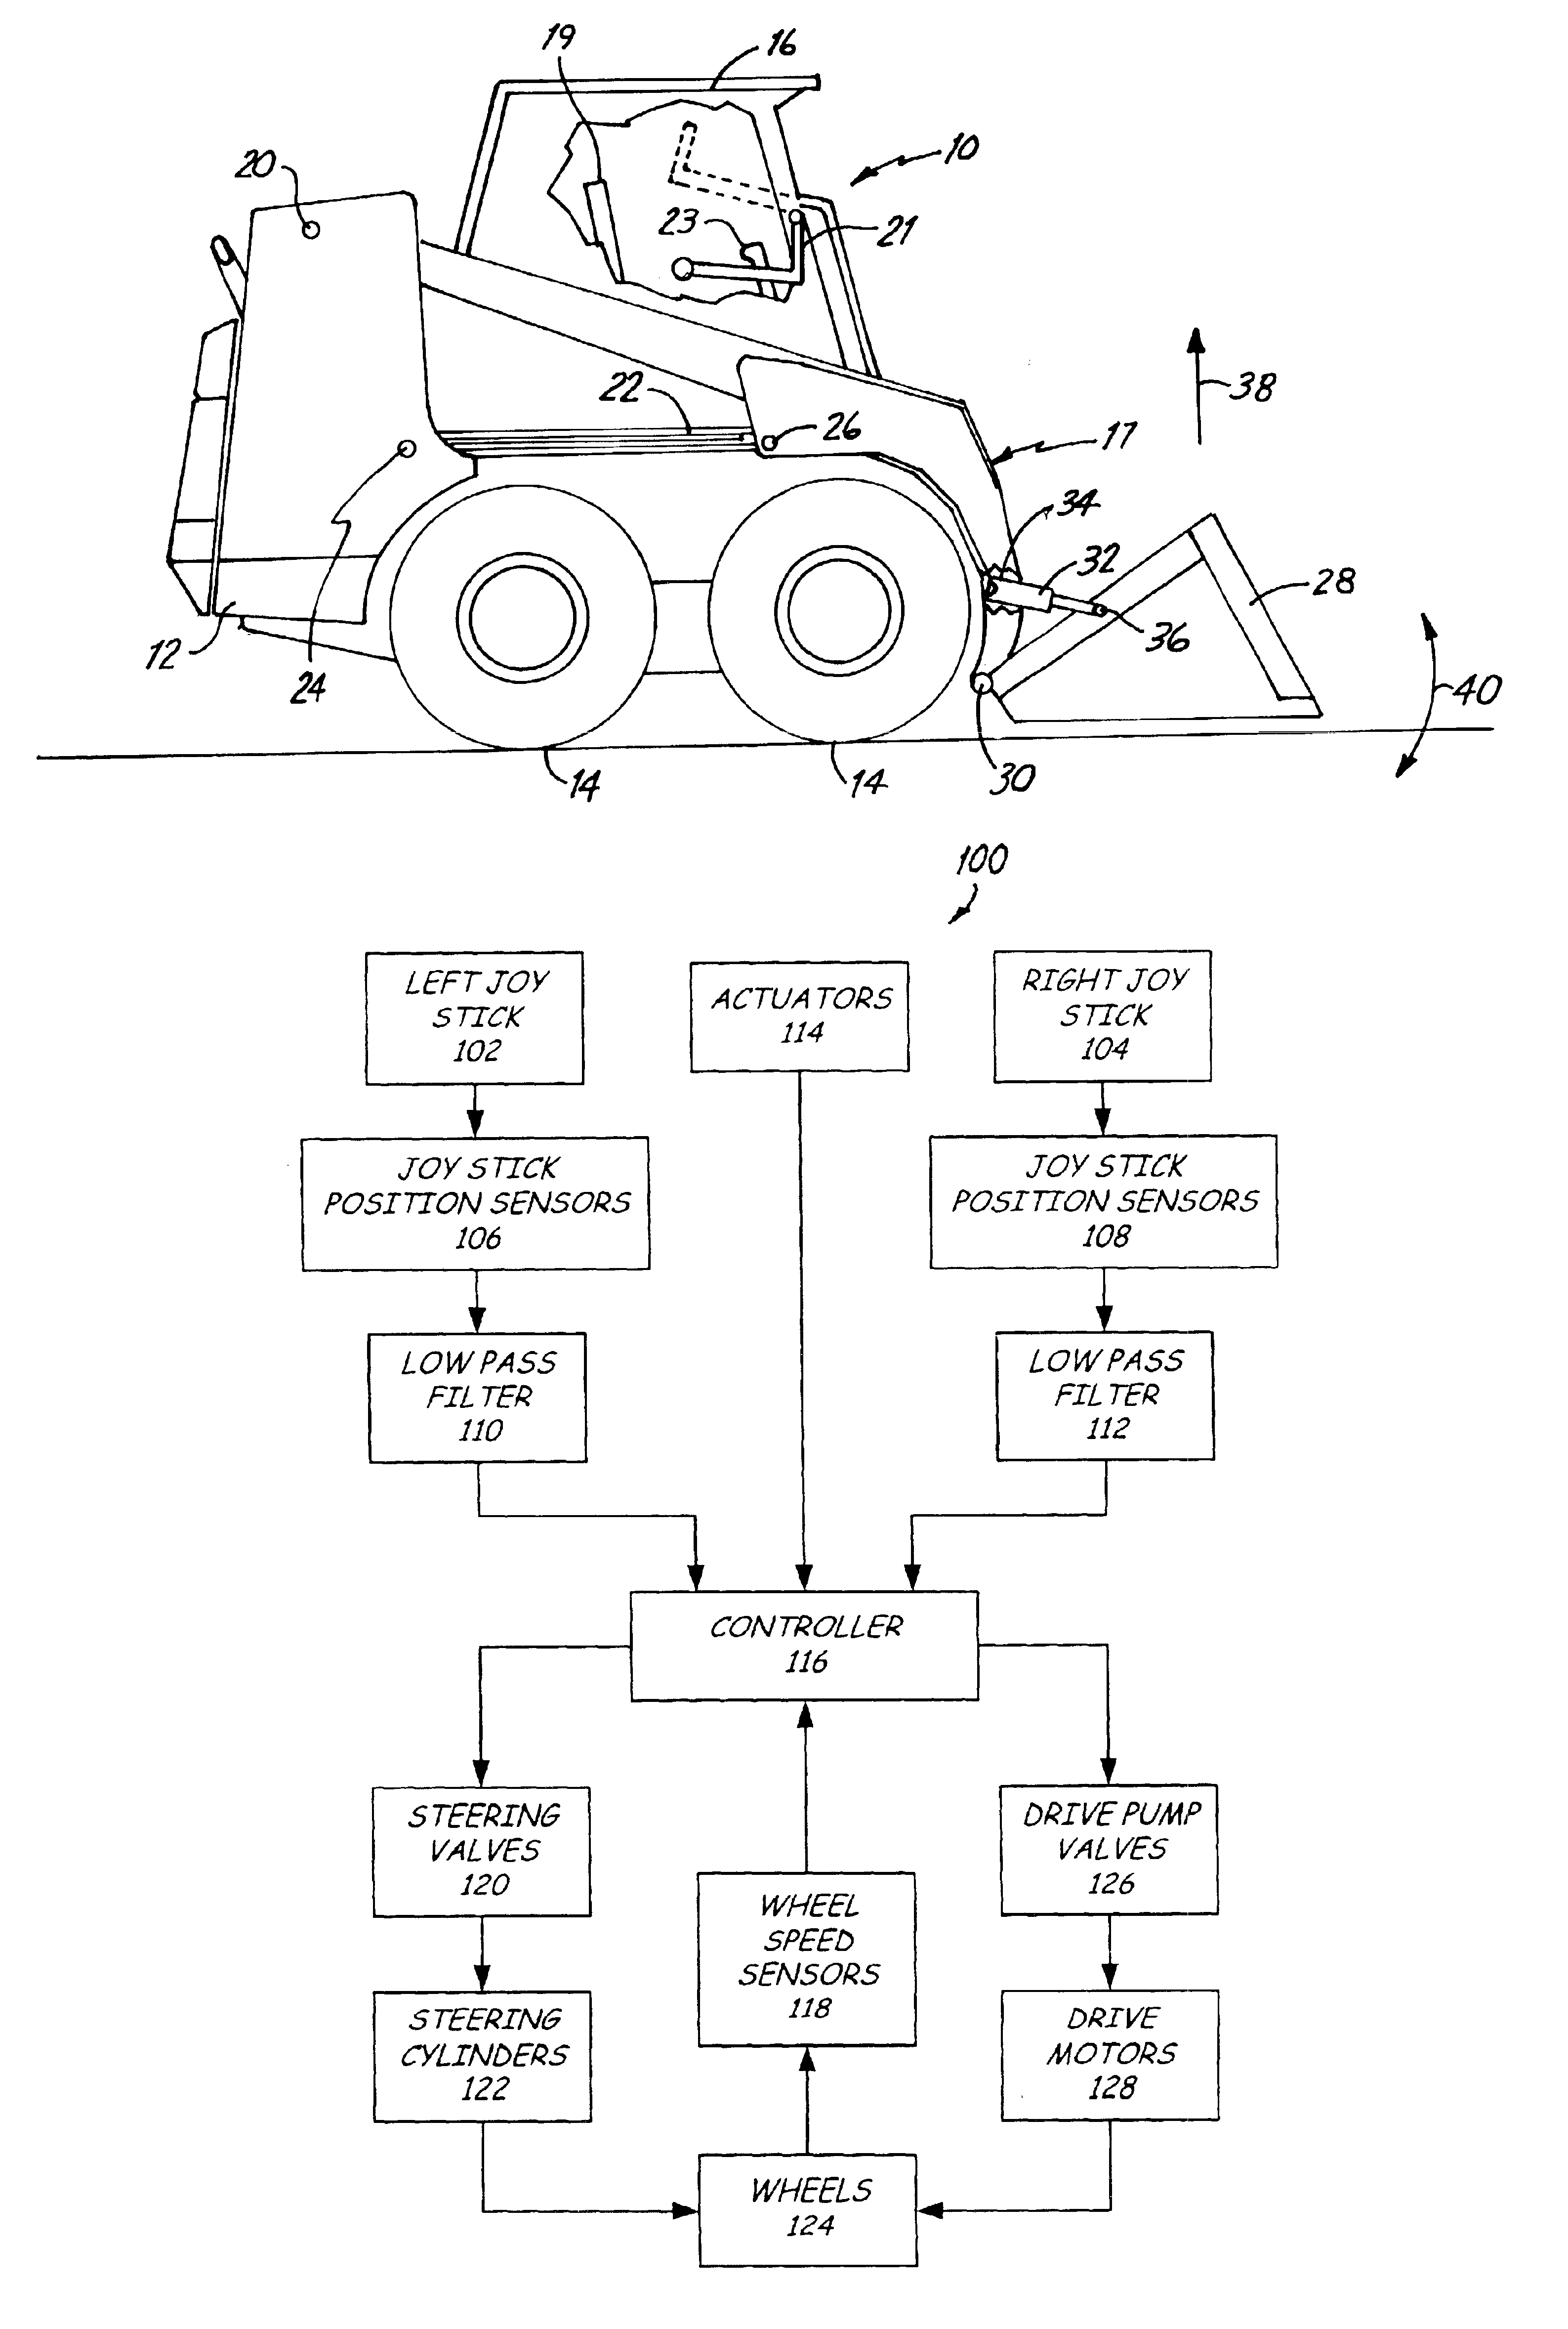 Joystick steering on power machine with filtered steering input